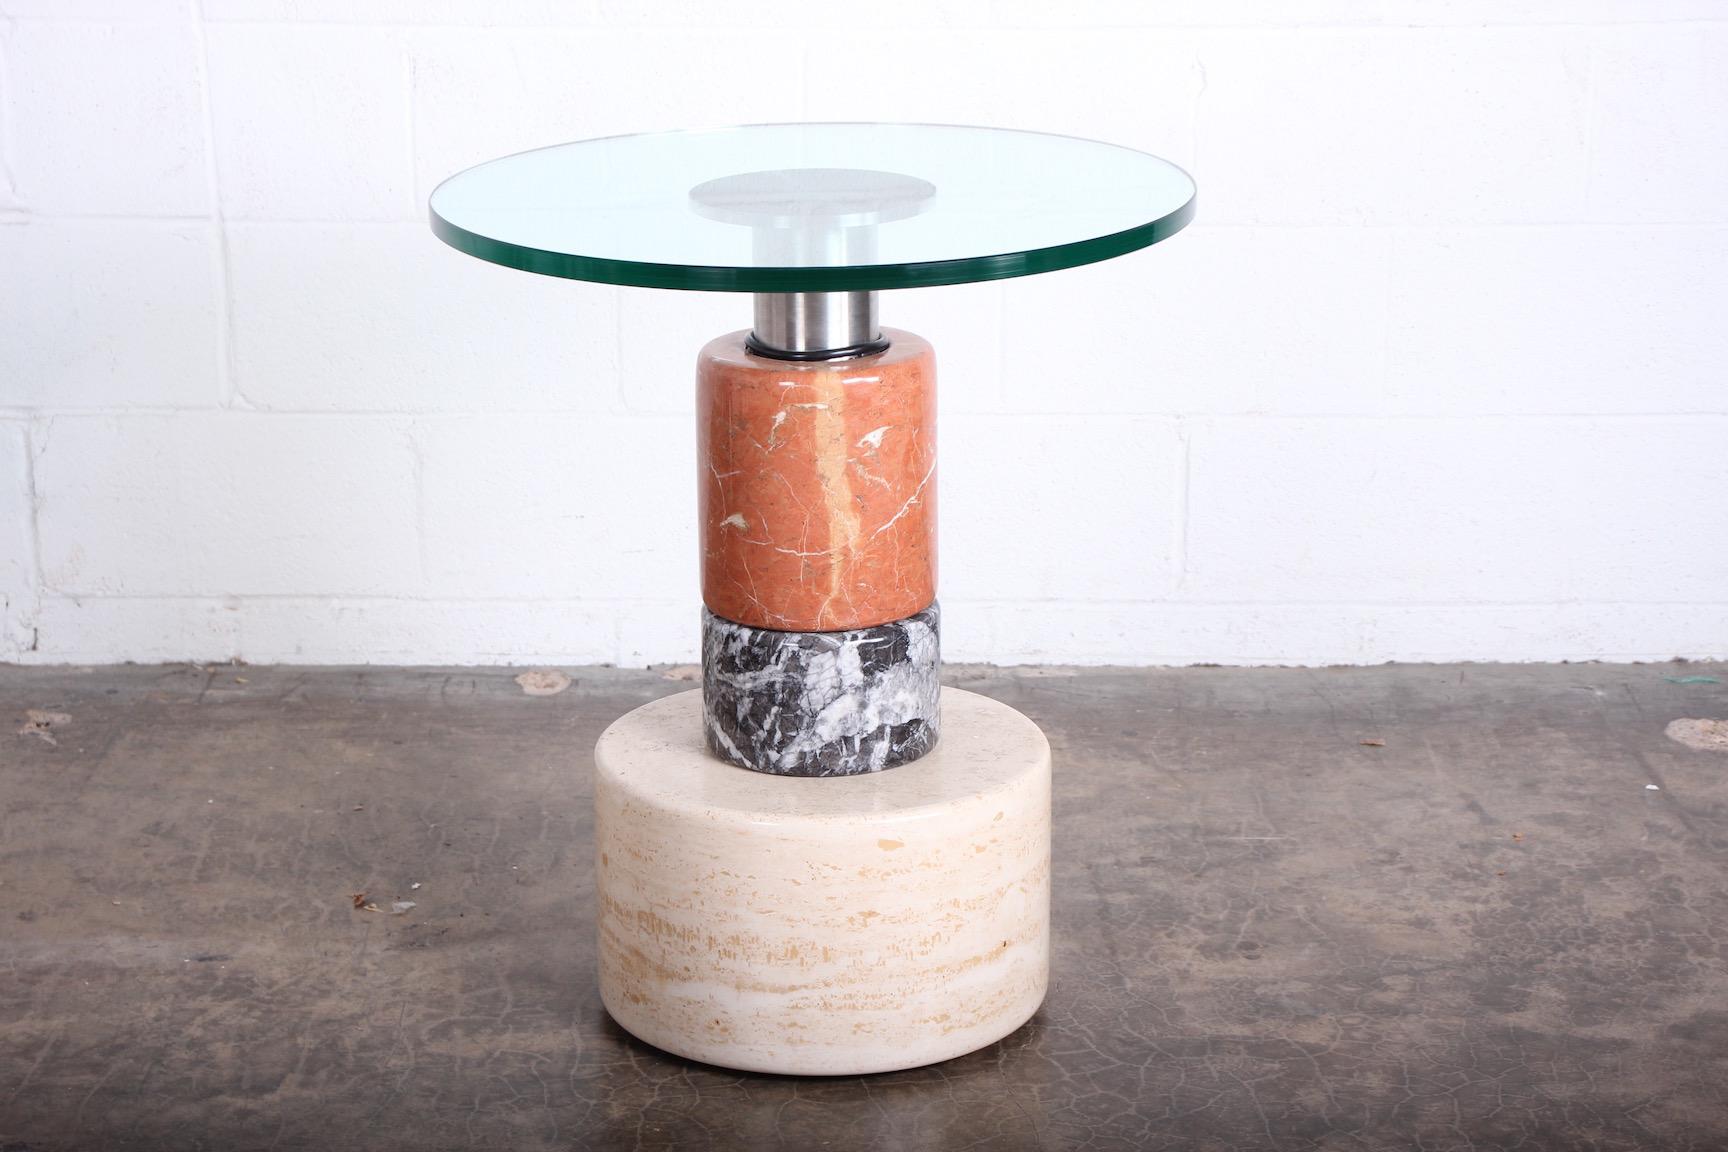 A marble, glass and stainless steel Menhir table designed by Giotto Stoppino for Acerbis International, 1983.